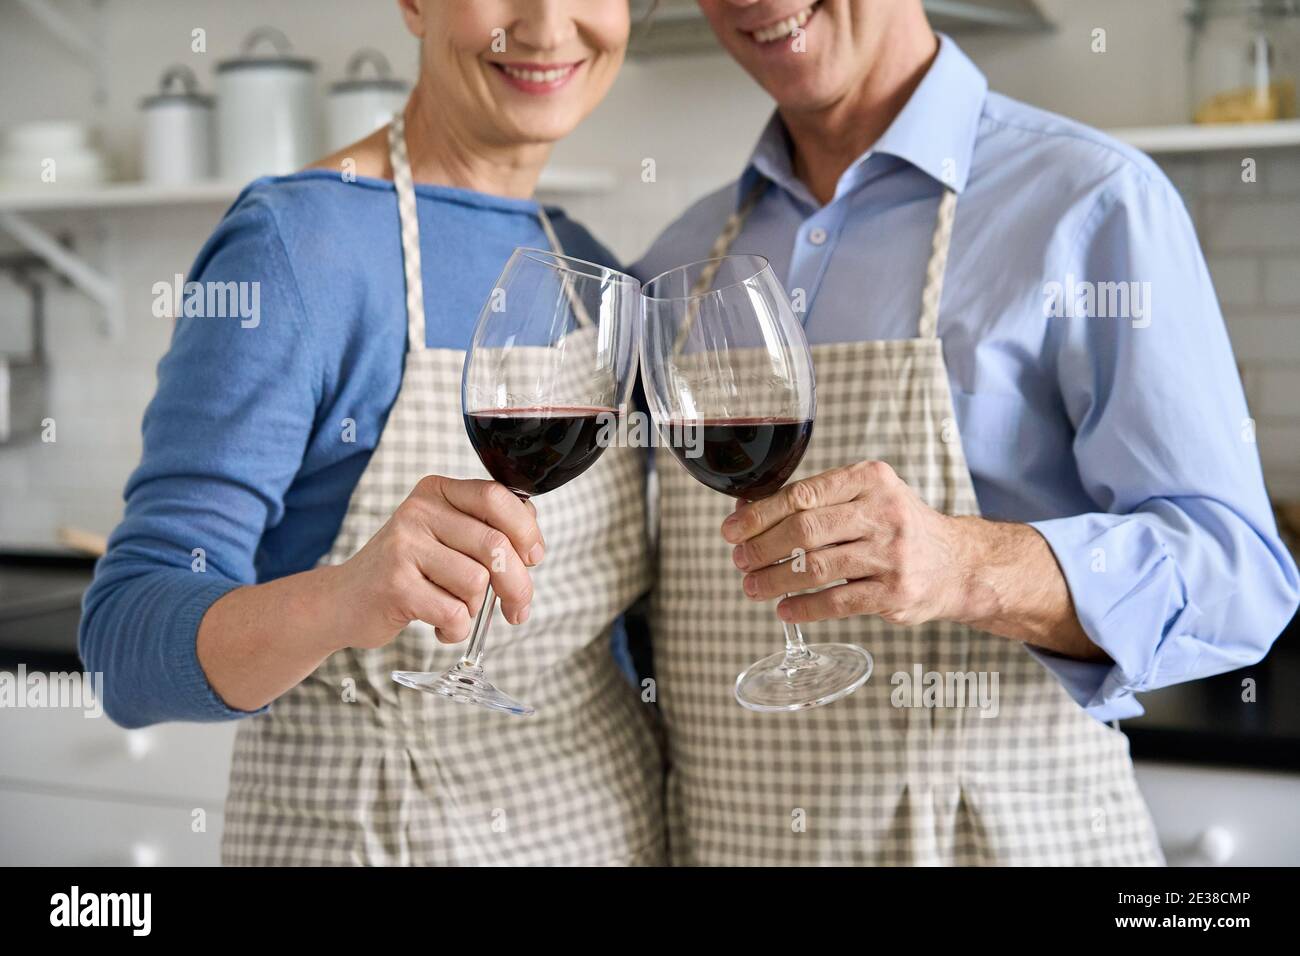 Happy senior couple holding glasses drinking wine standing in kitchen, close up. Stock Photo